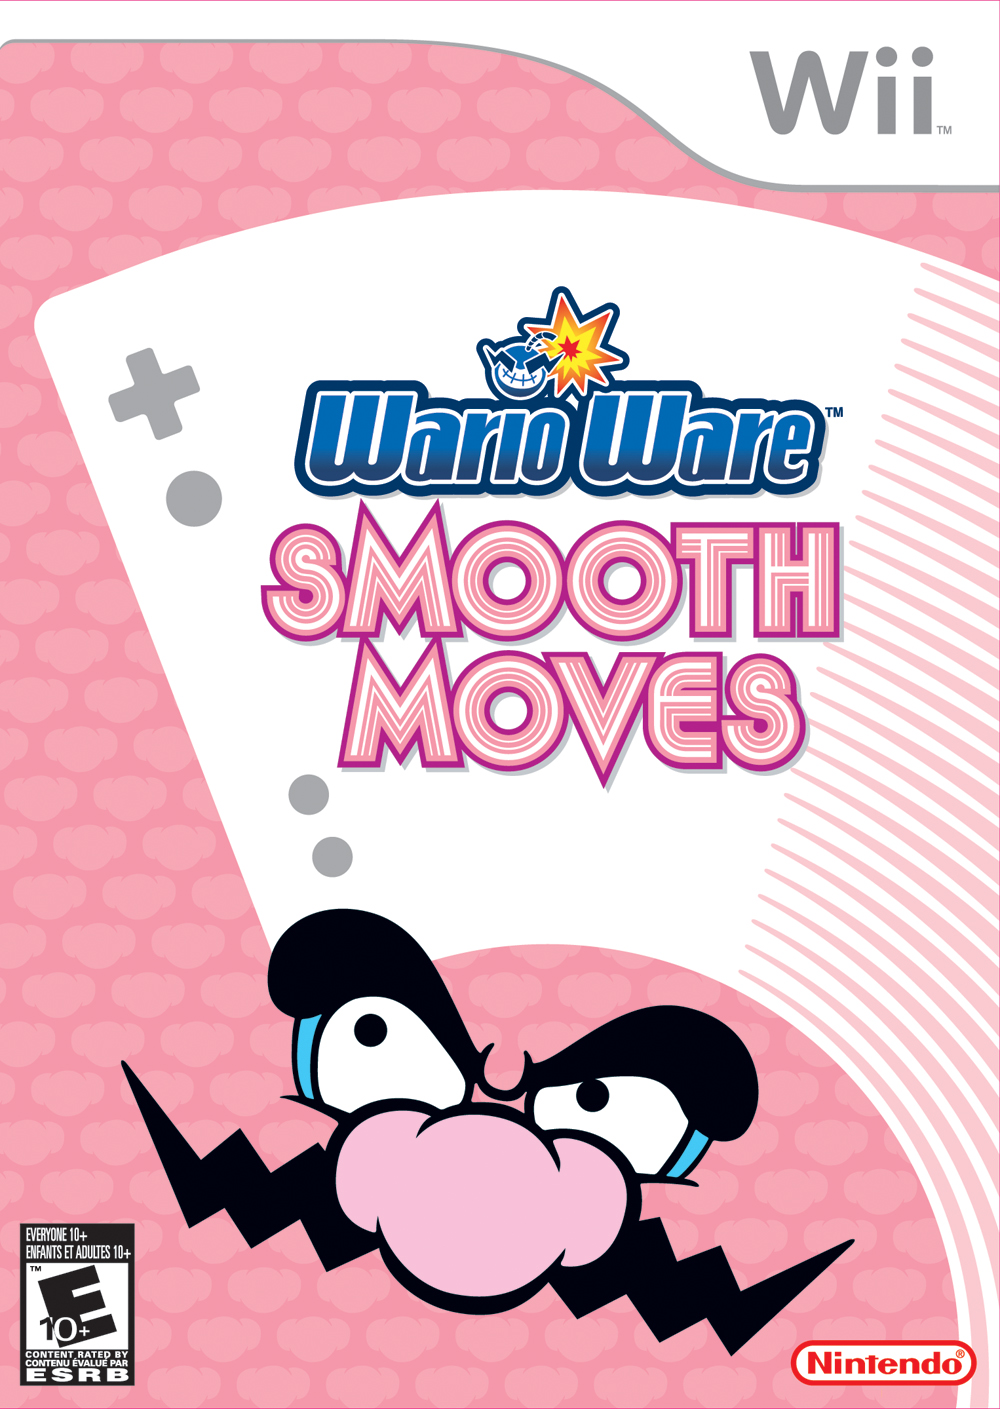 Smooth_moves_cover.jpg